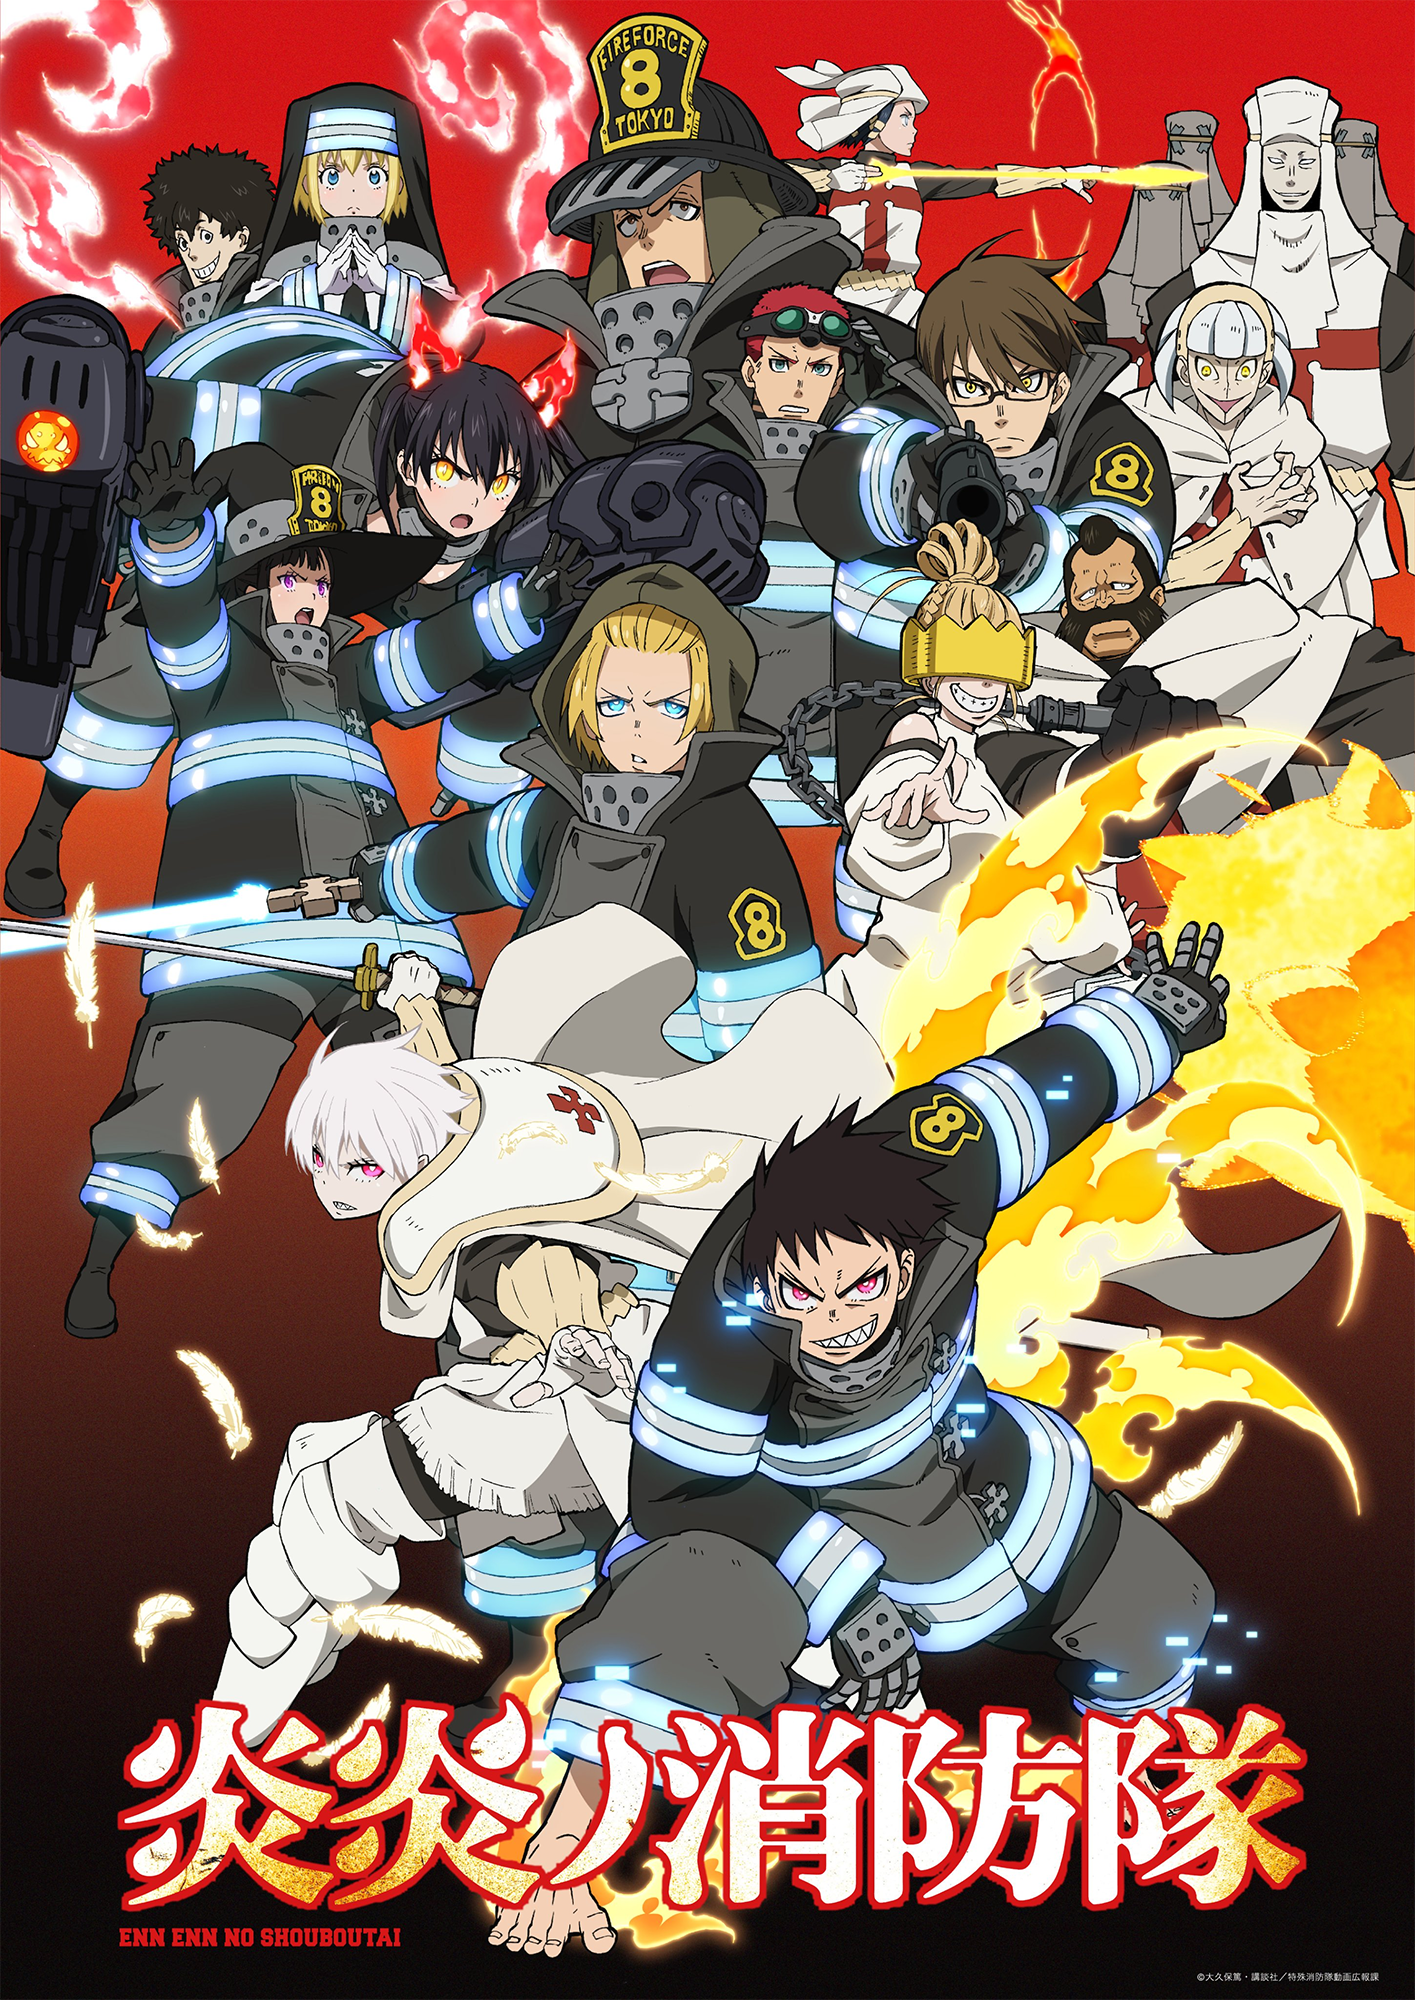 Characters appearing in Fire Force Anime